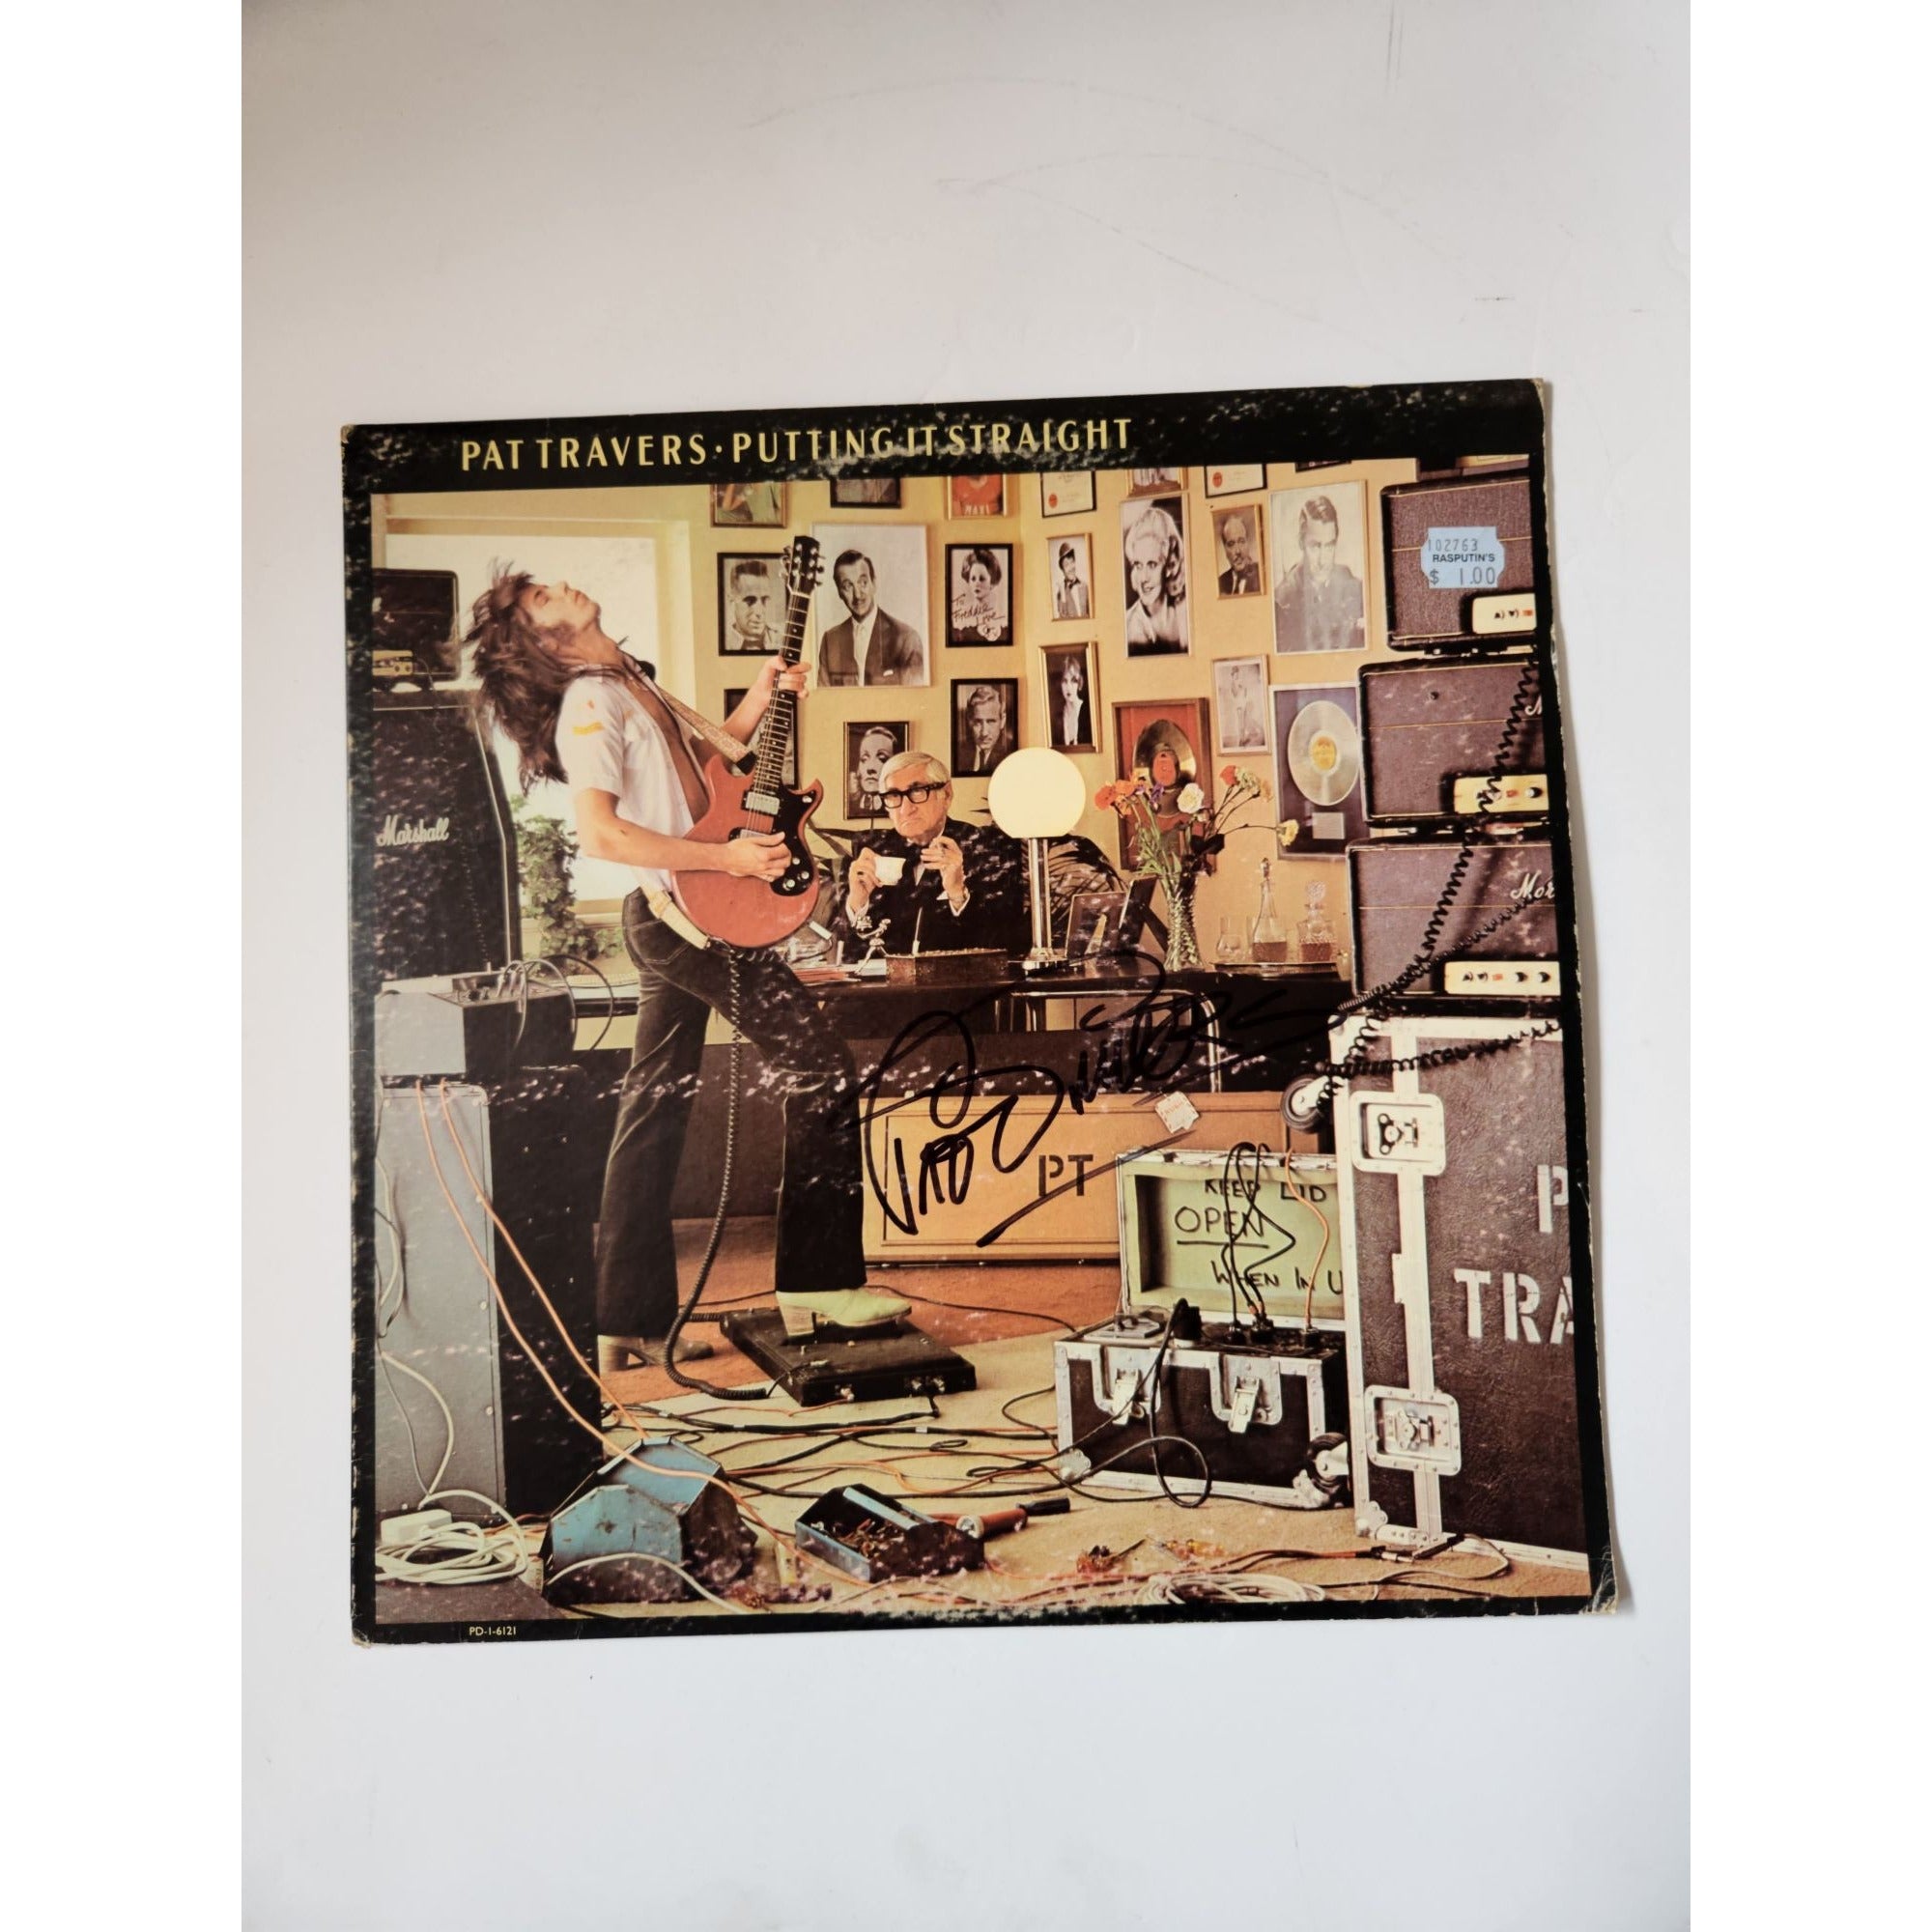 Pat Travers putting it straight LP signed